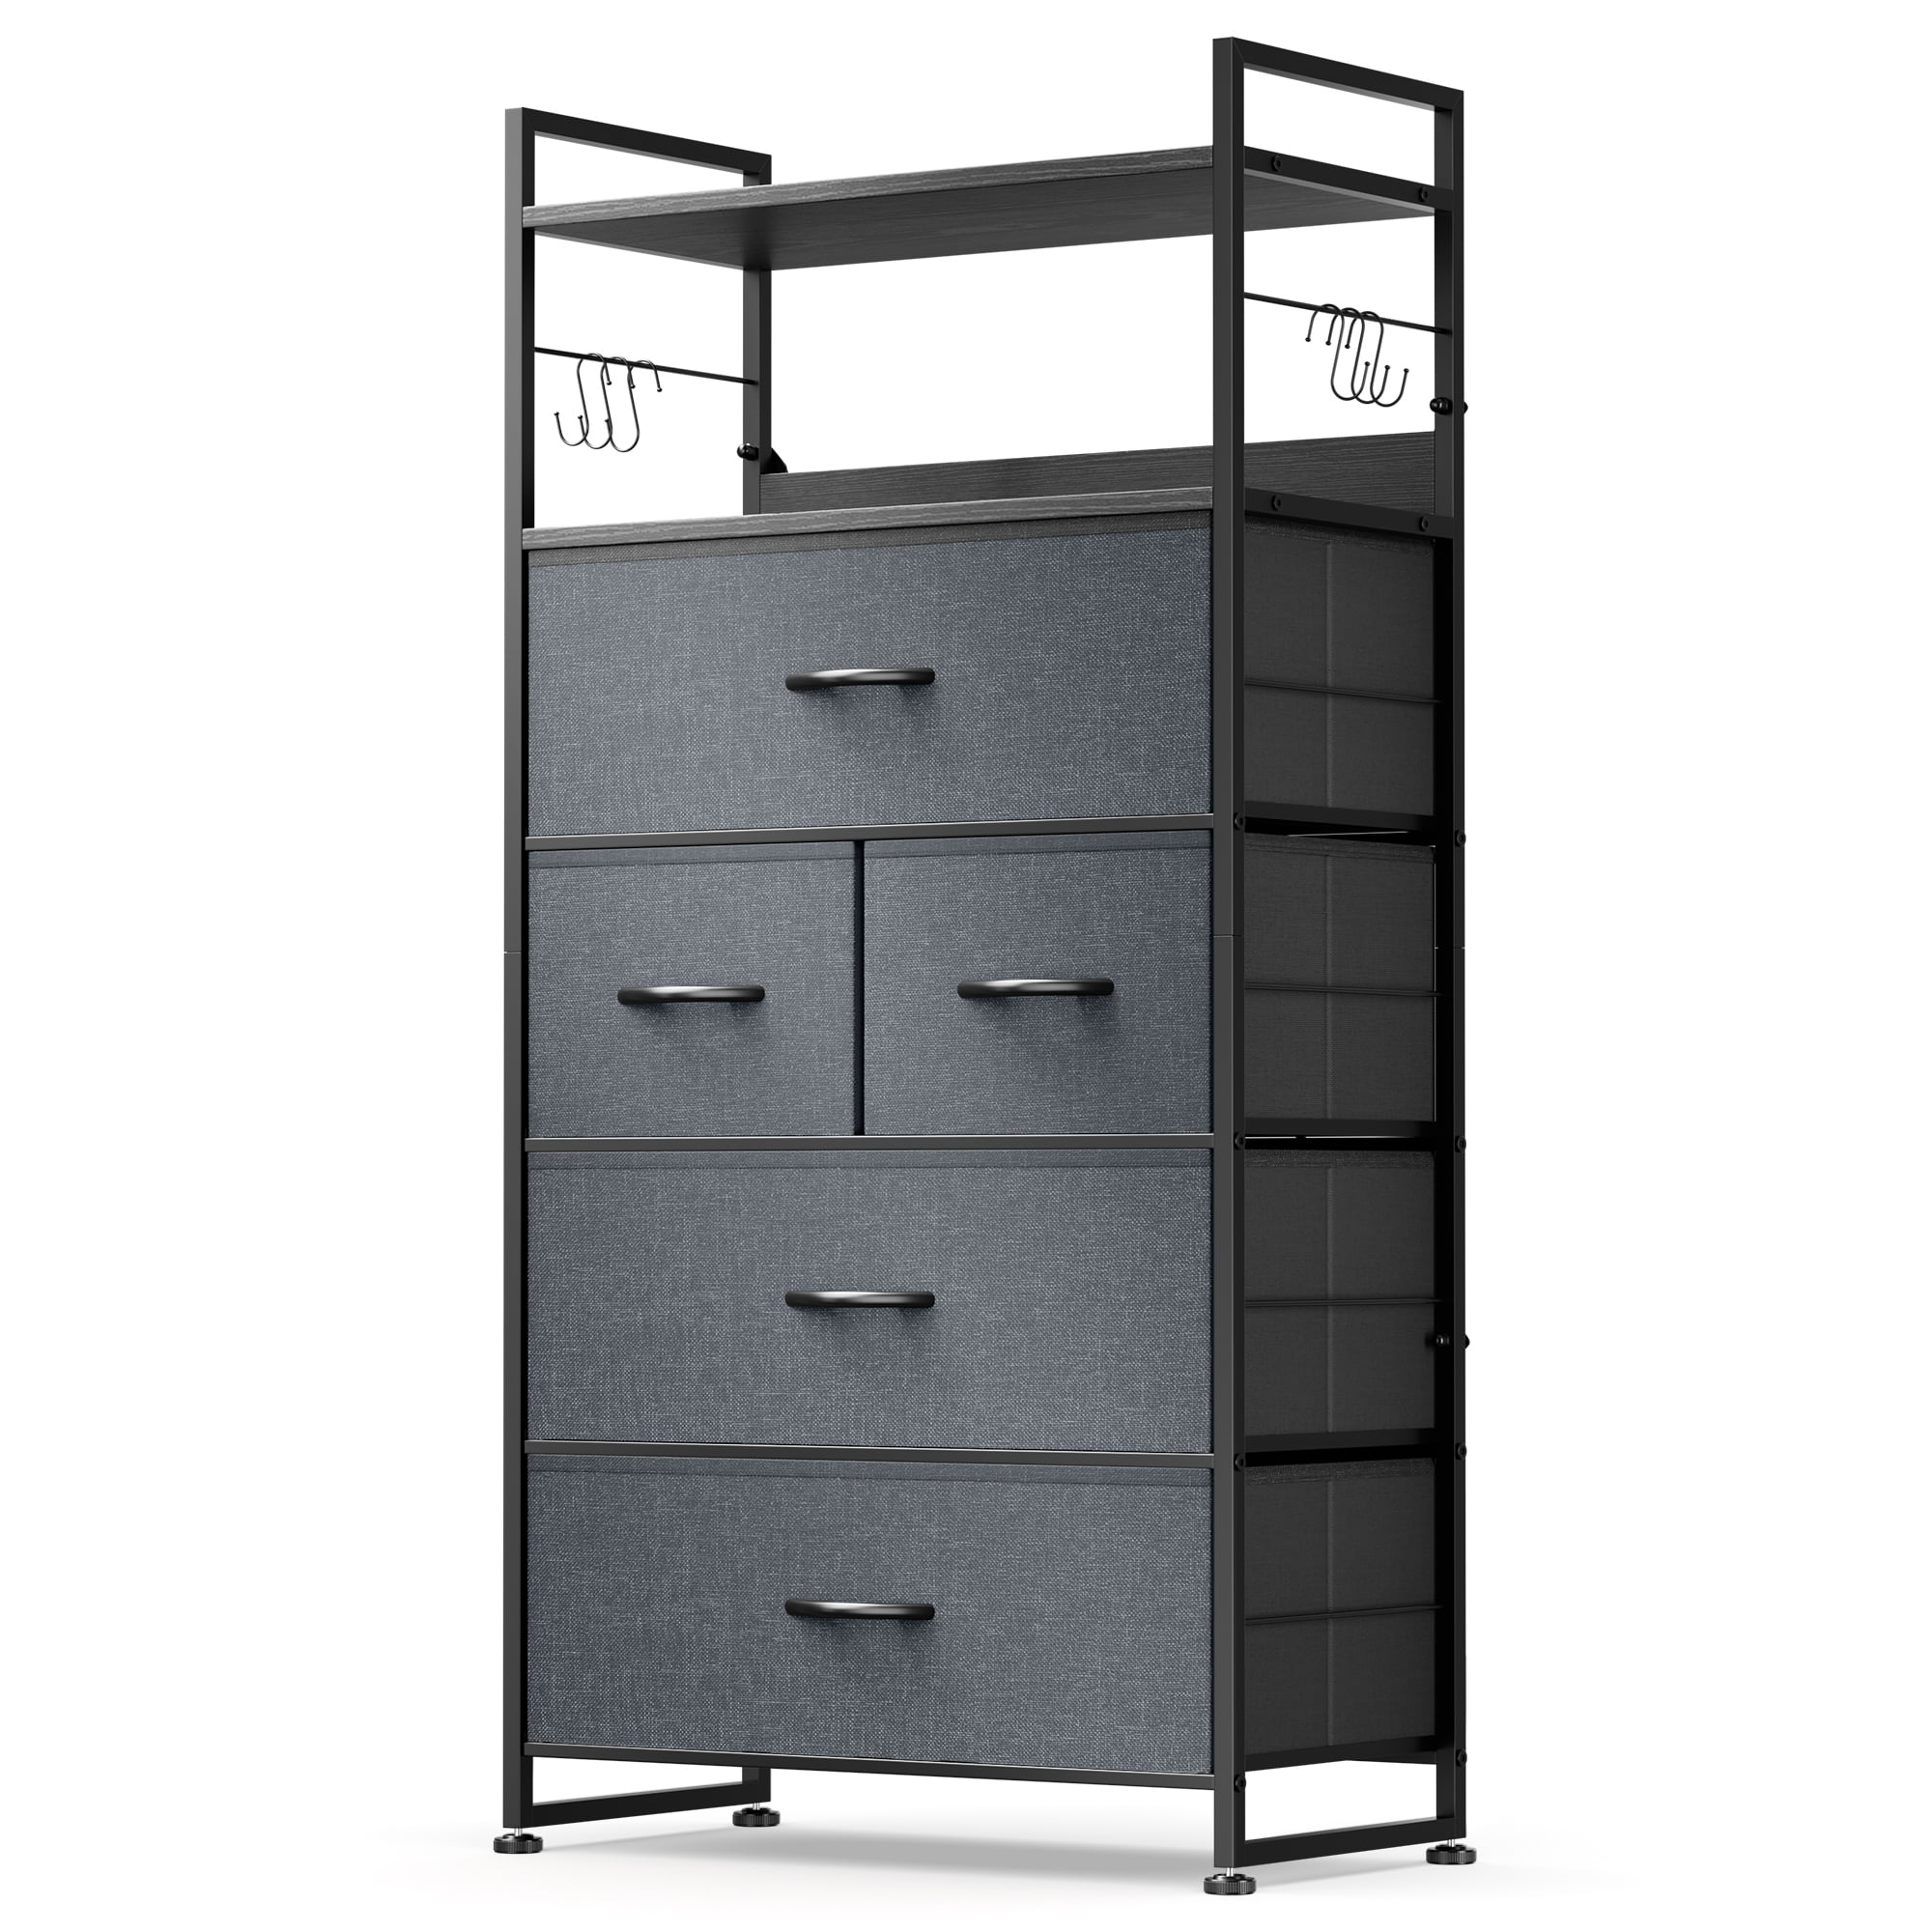 GIKPAL 10-Drawer Dresser, Chest of Drawers for Bedroom with Side Pockets  and Hooks Fabric Storage Dresser Sturdy Steel Frame Wood Top Organizer Unit